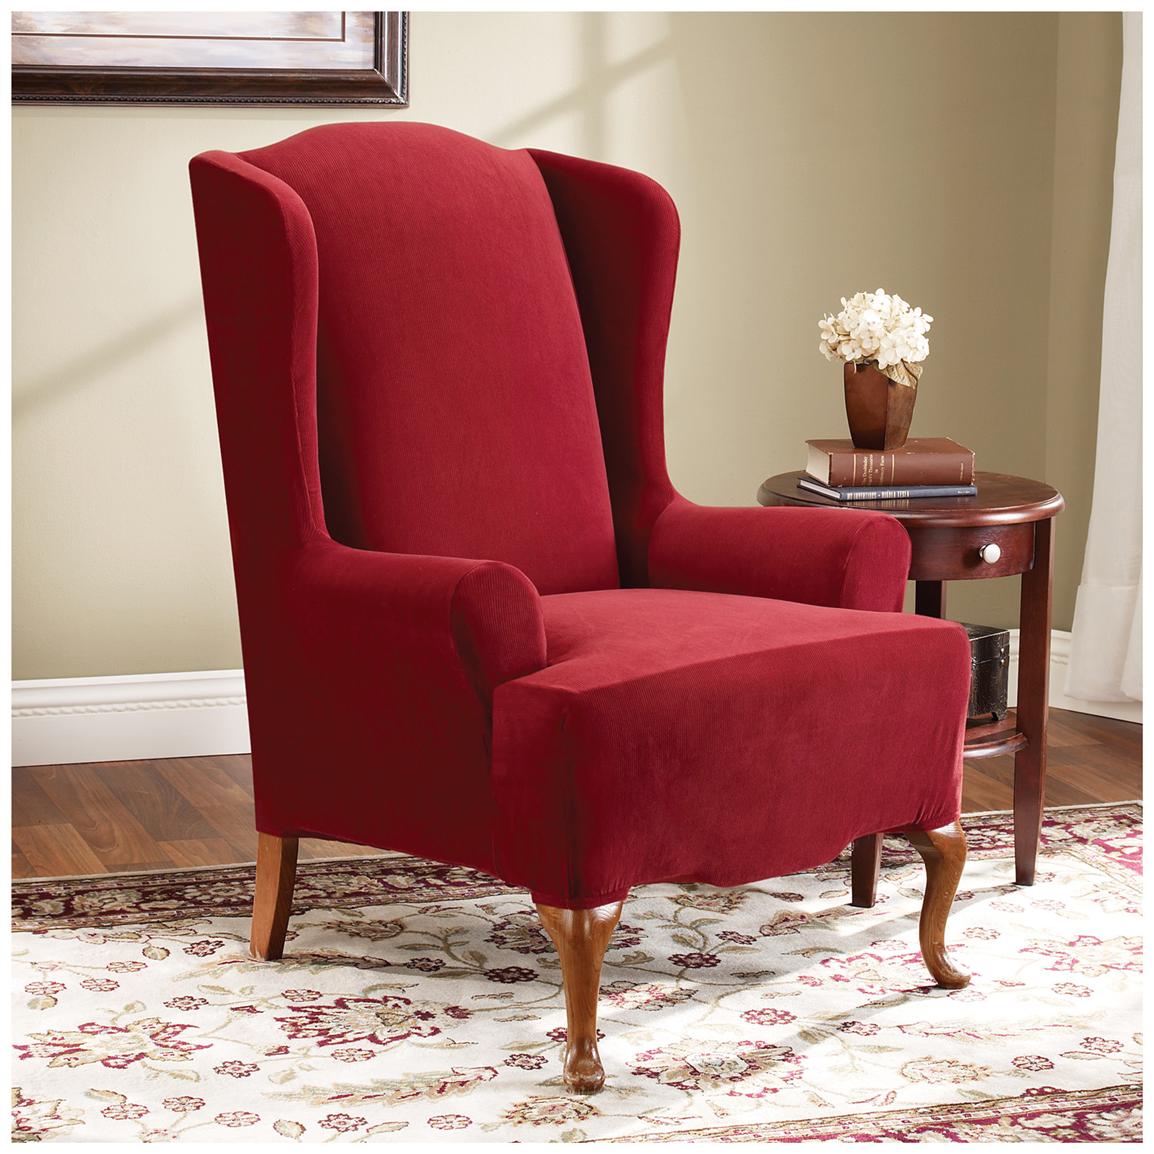 Top 20 Wing Back Chair Covers - Best Collections Ever | Home Decor